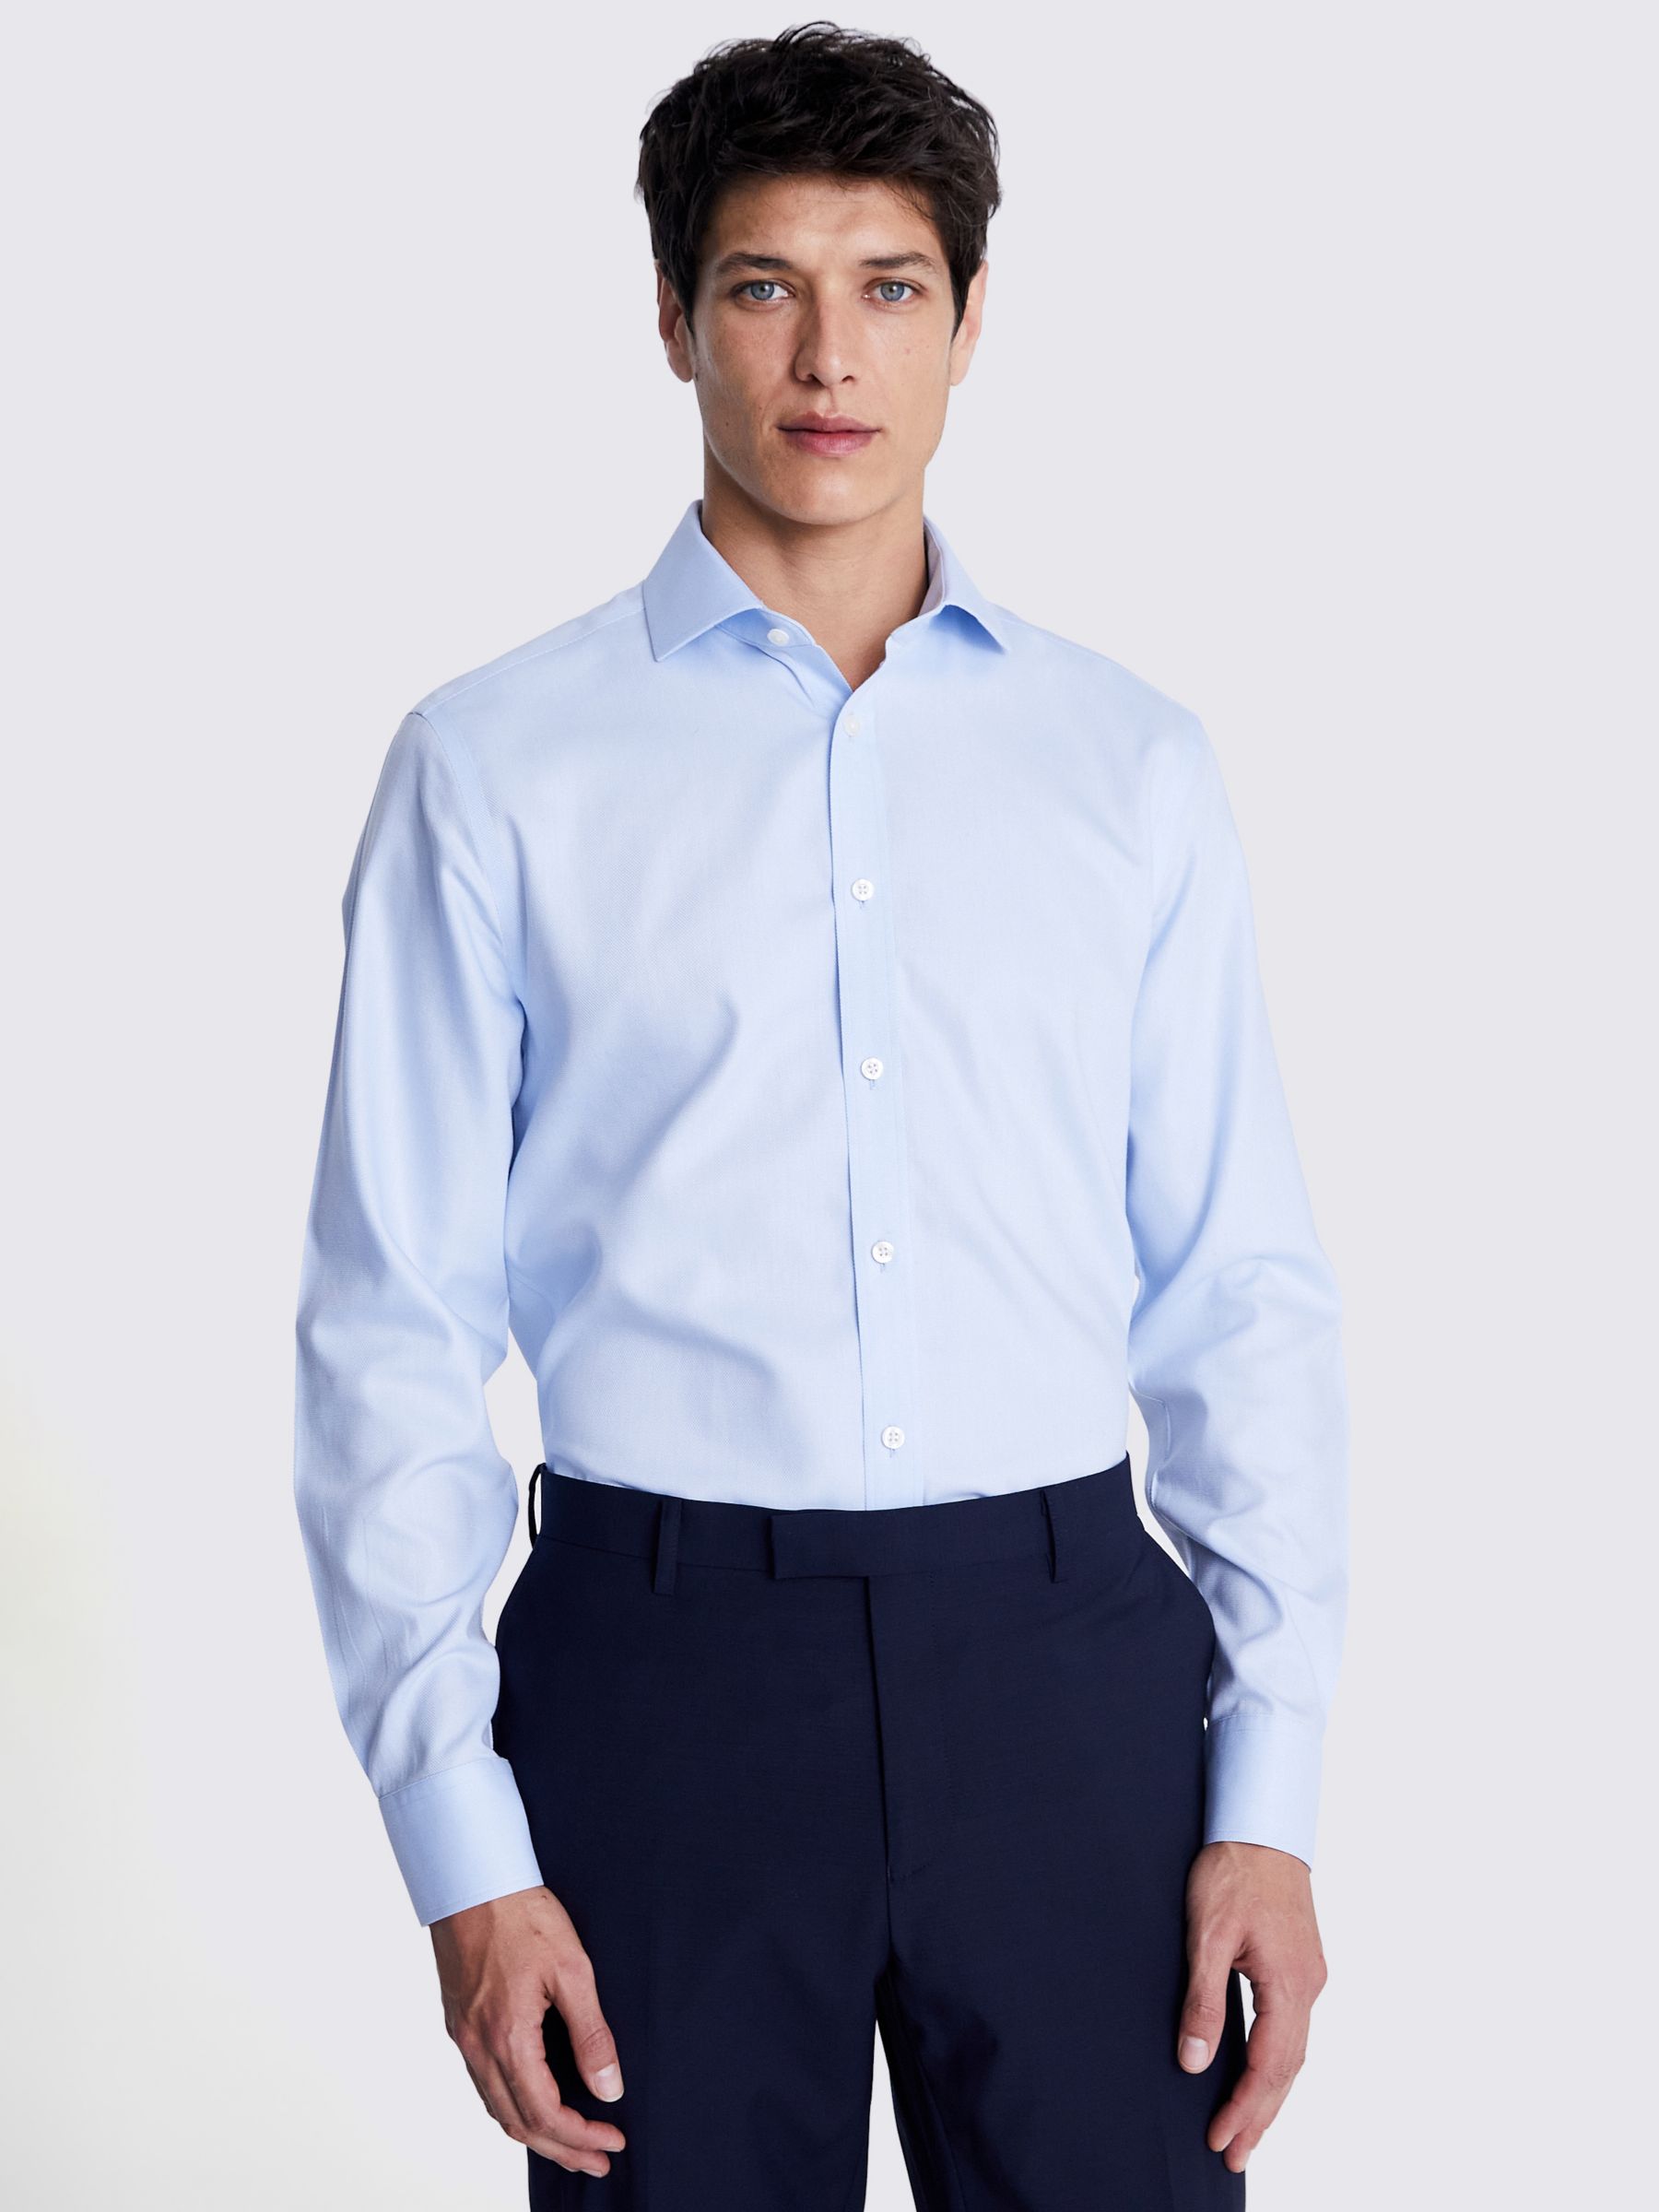 Moss Tailored Fit Royal Oxford Non-Iron Shirt, Sky Blue, 15.5